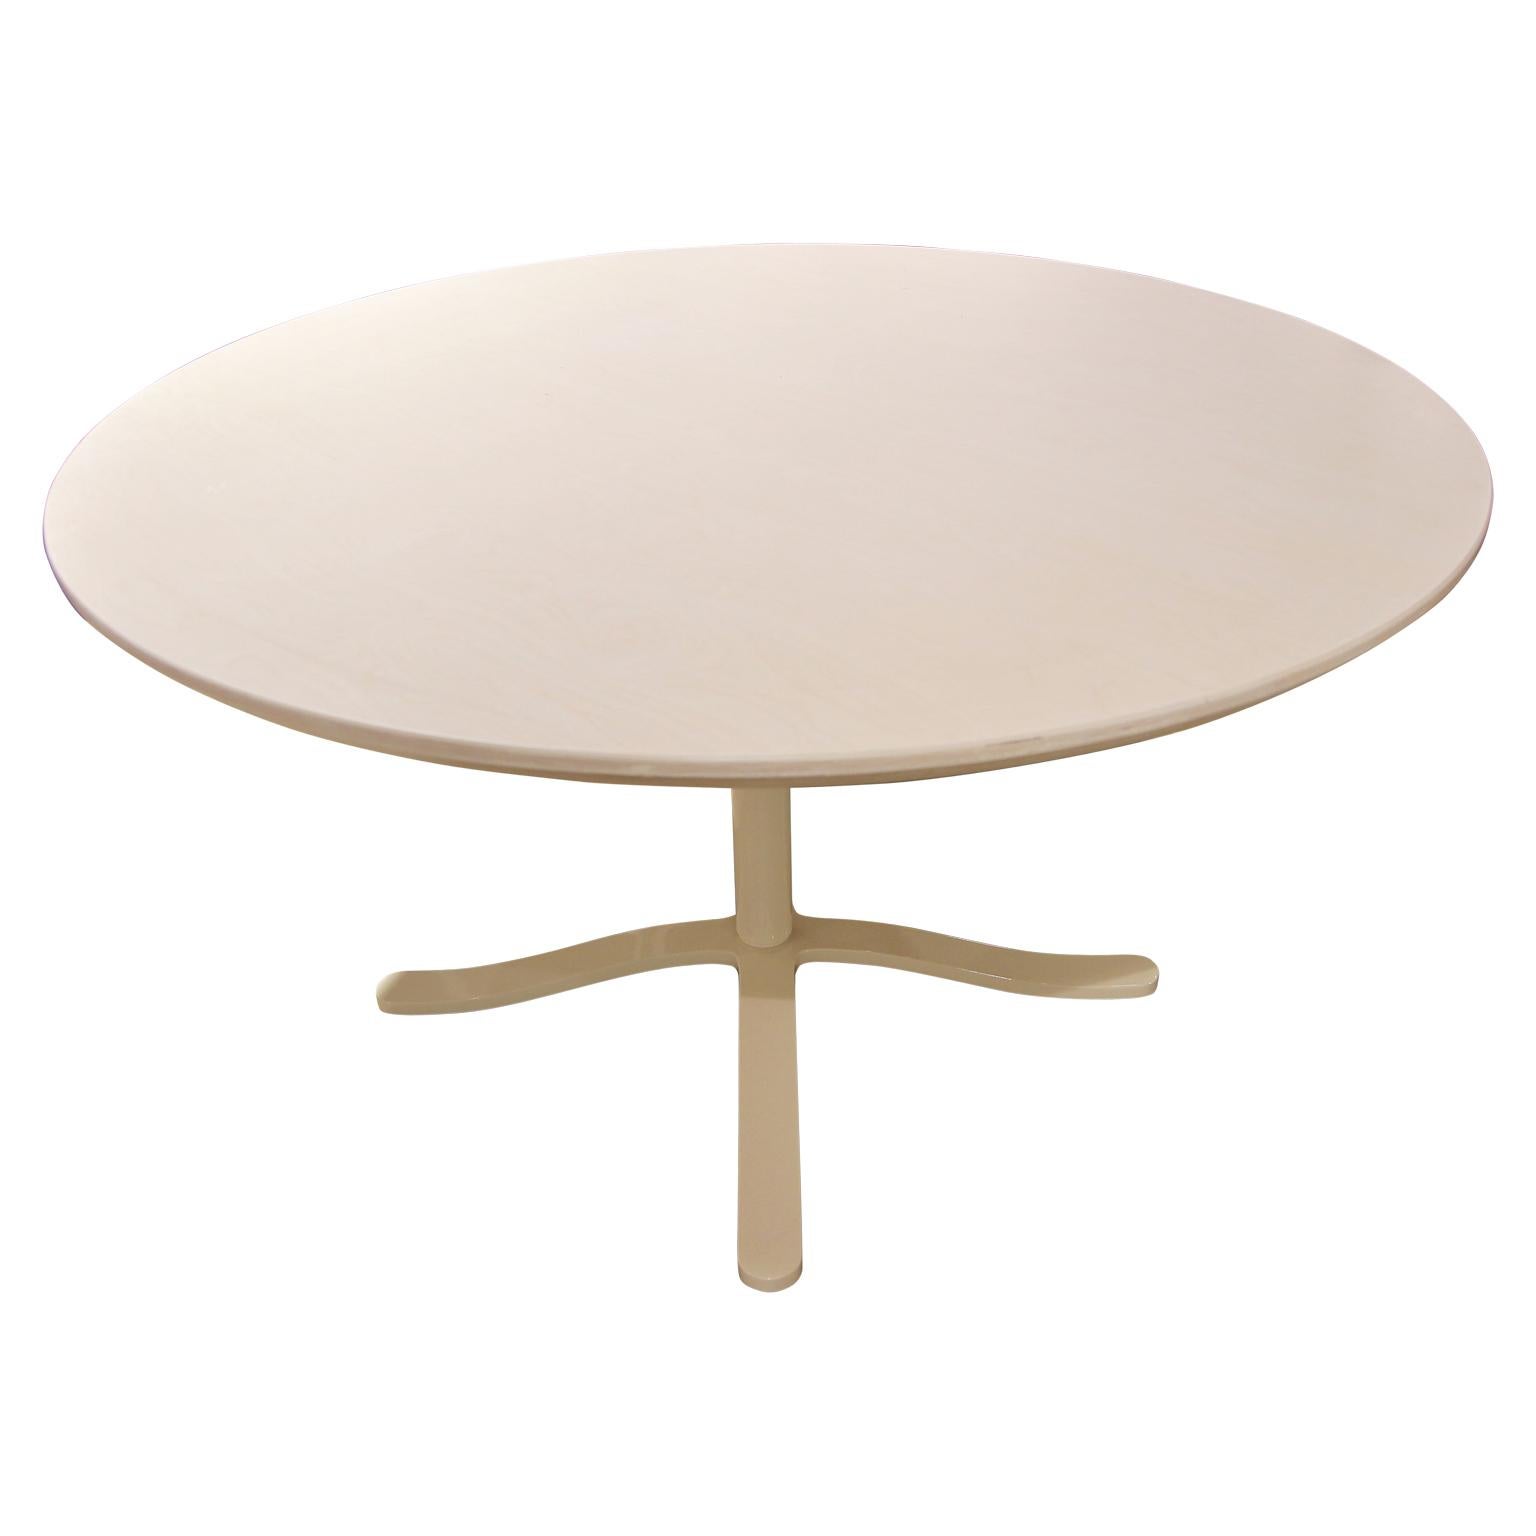 Unique custom round dining table with a white powder coated steel base. The top is made from light oak with a white stain and is in the Mid-Century Modern style. Made in Houston, TX by Reeves Design + Art local craftsman team. Despite the picture